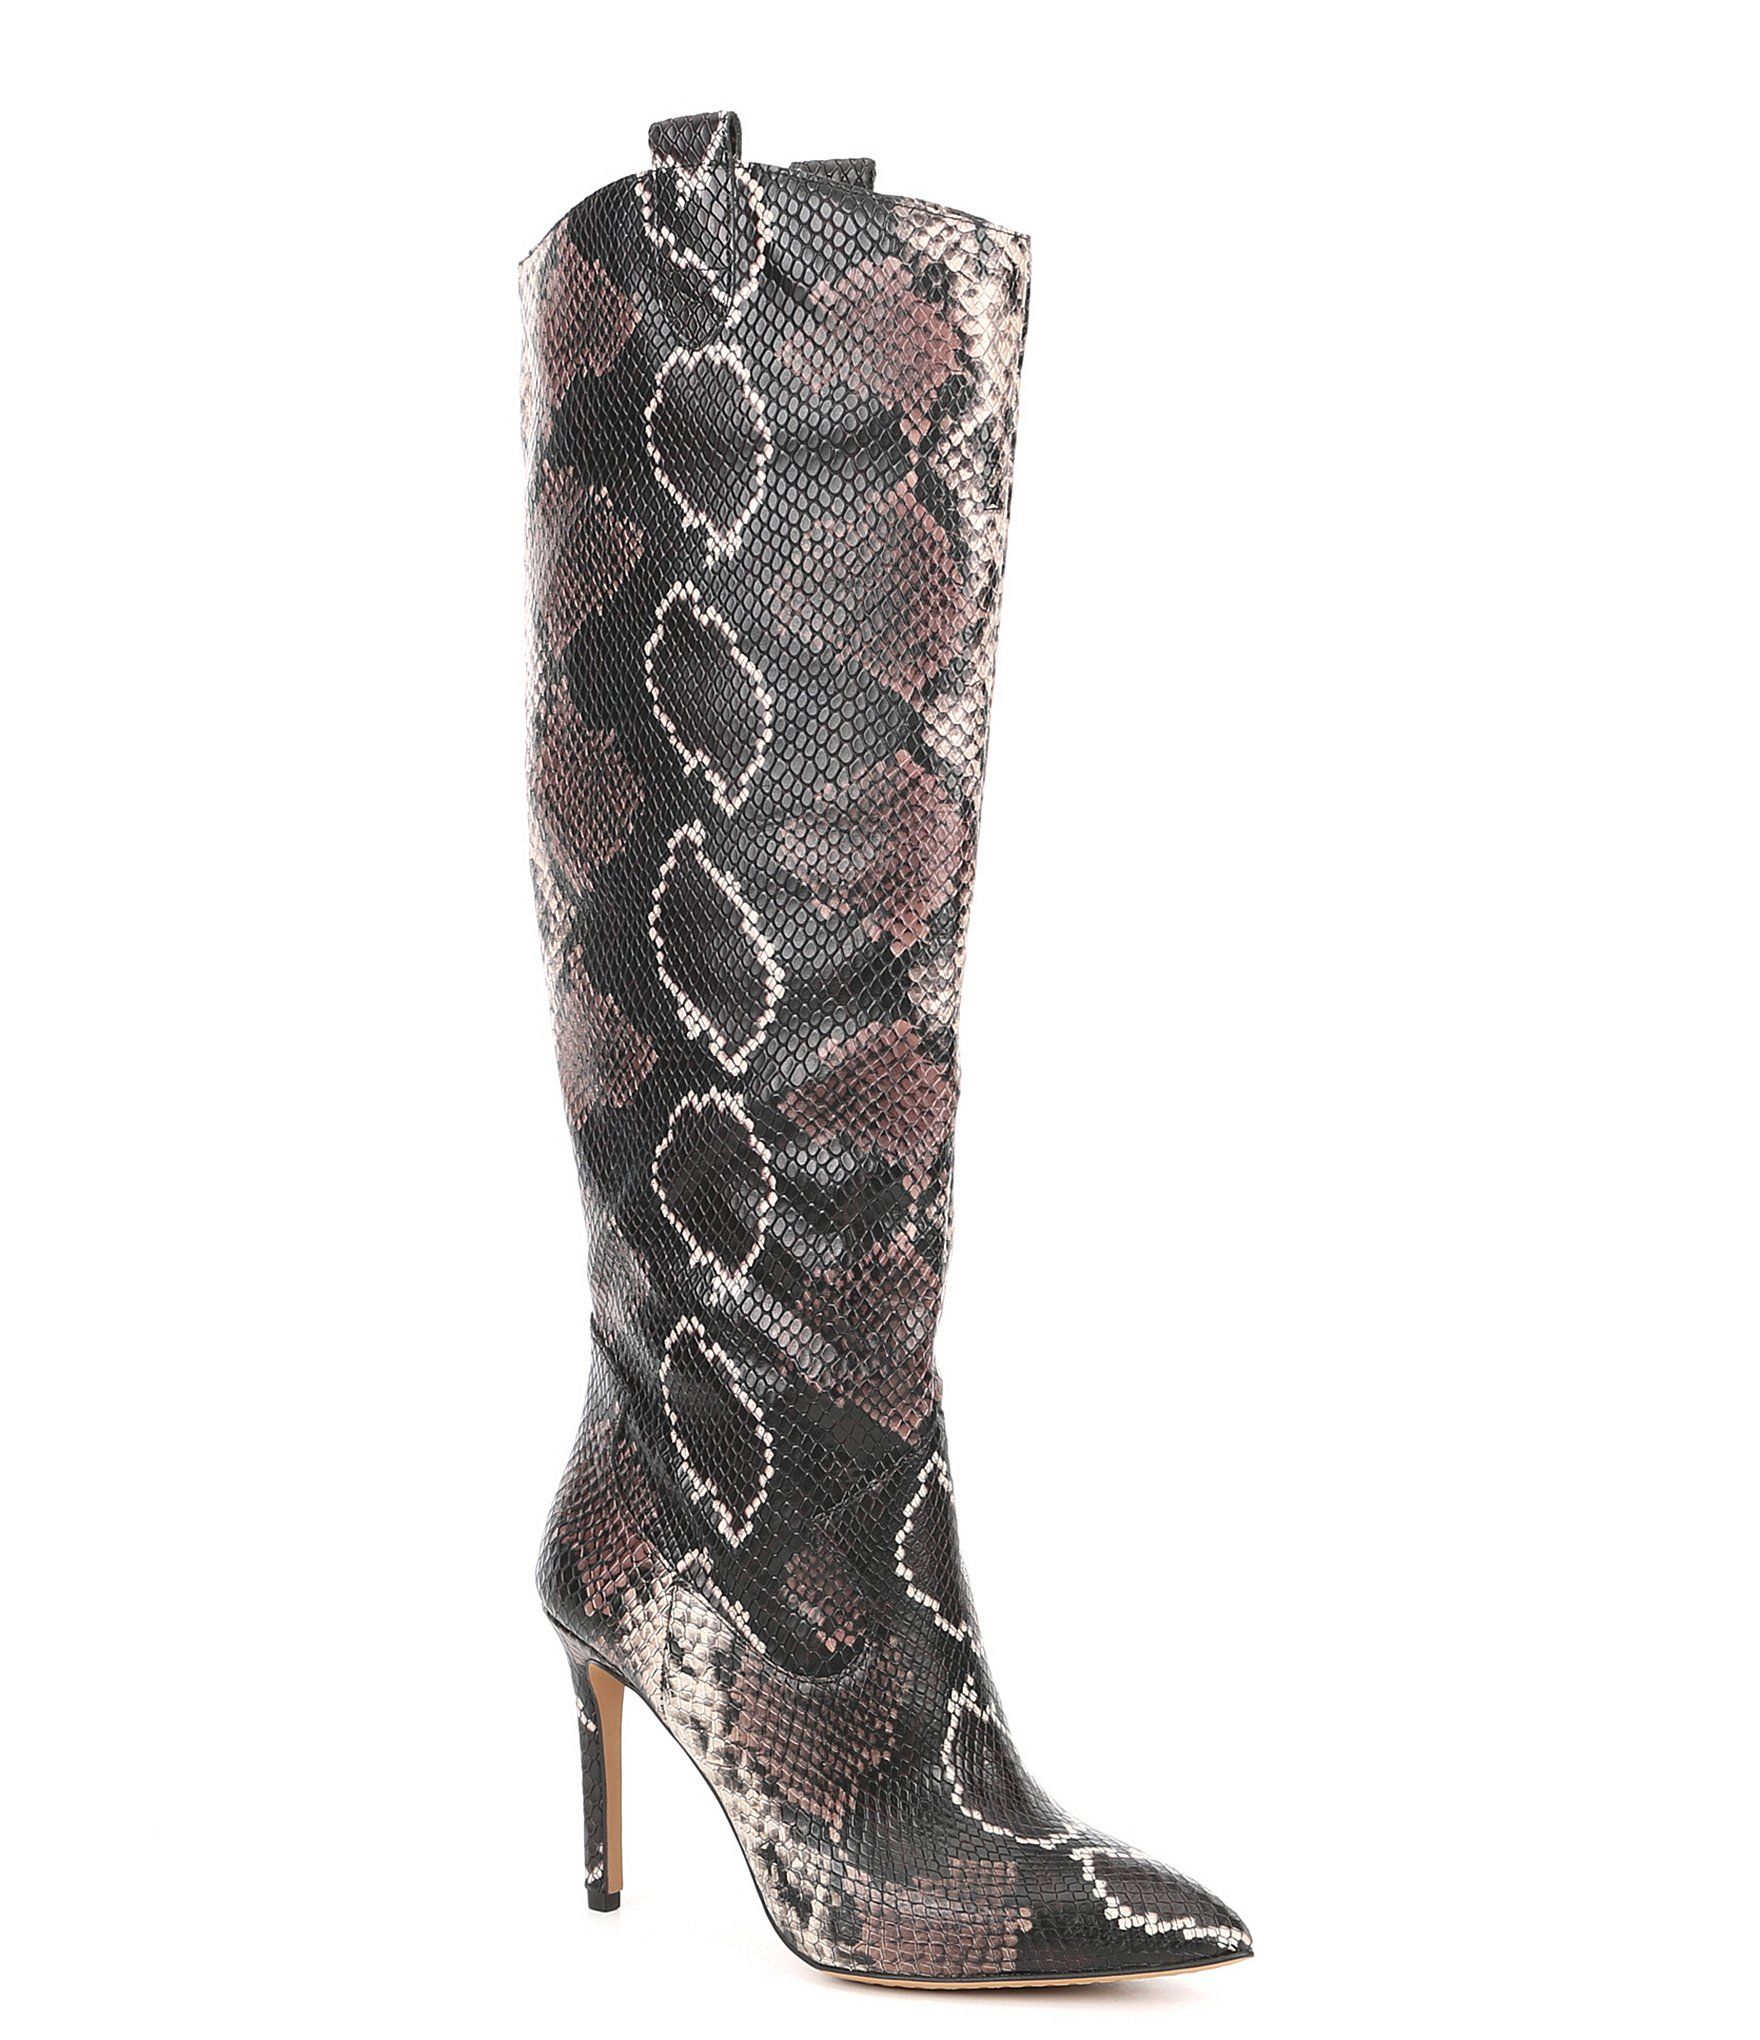 vince camuto snake boots